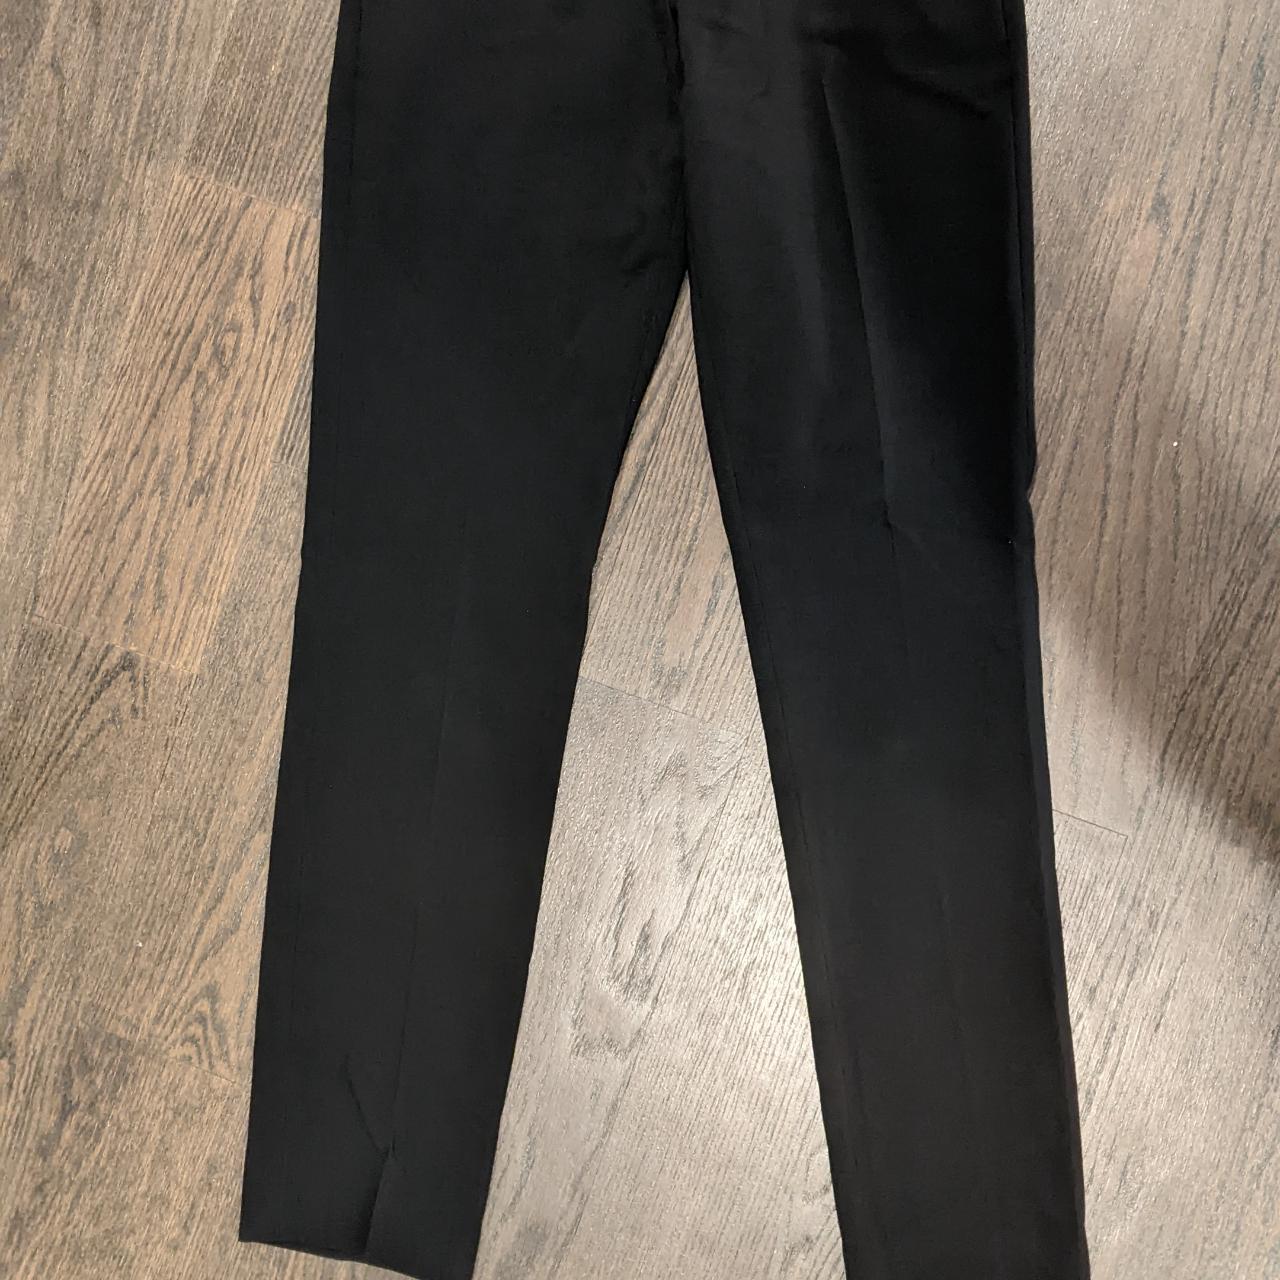 Buy Black Tailored Elastic Back Skinny Trousers from the Next UK online shop